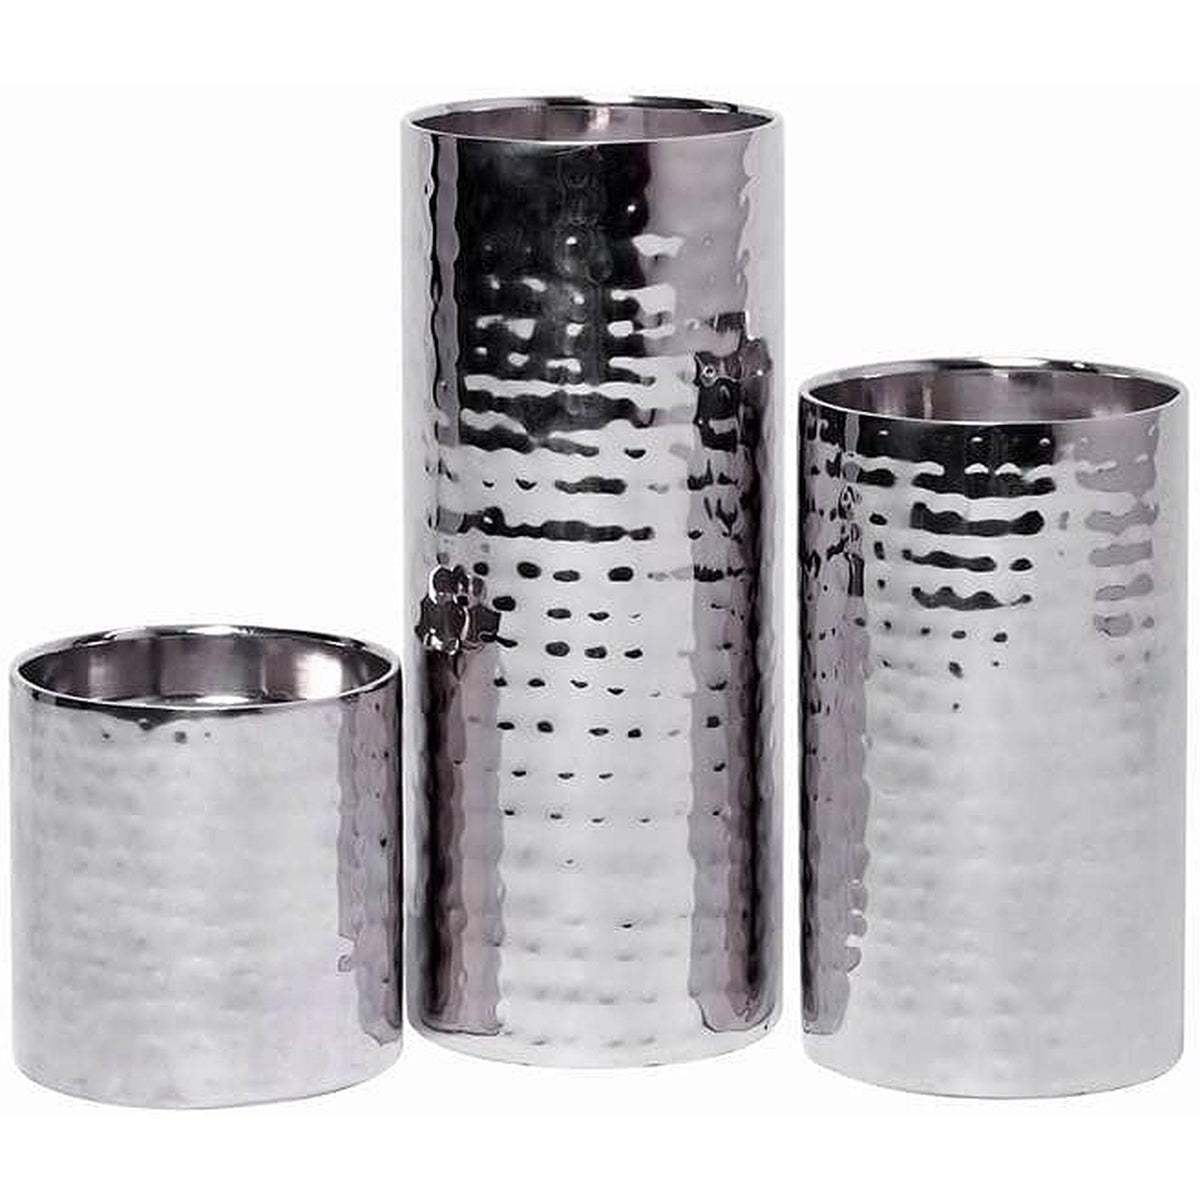 HOSLEY®   Pillar Candle Holders, Silver Finish, Set of 3,  7", 5" 3" High